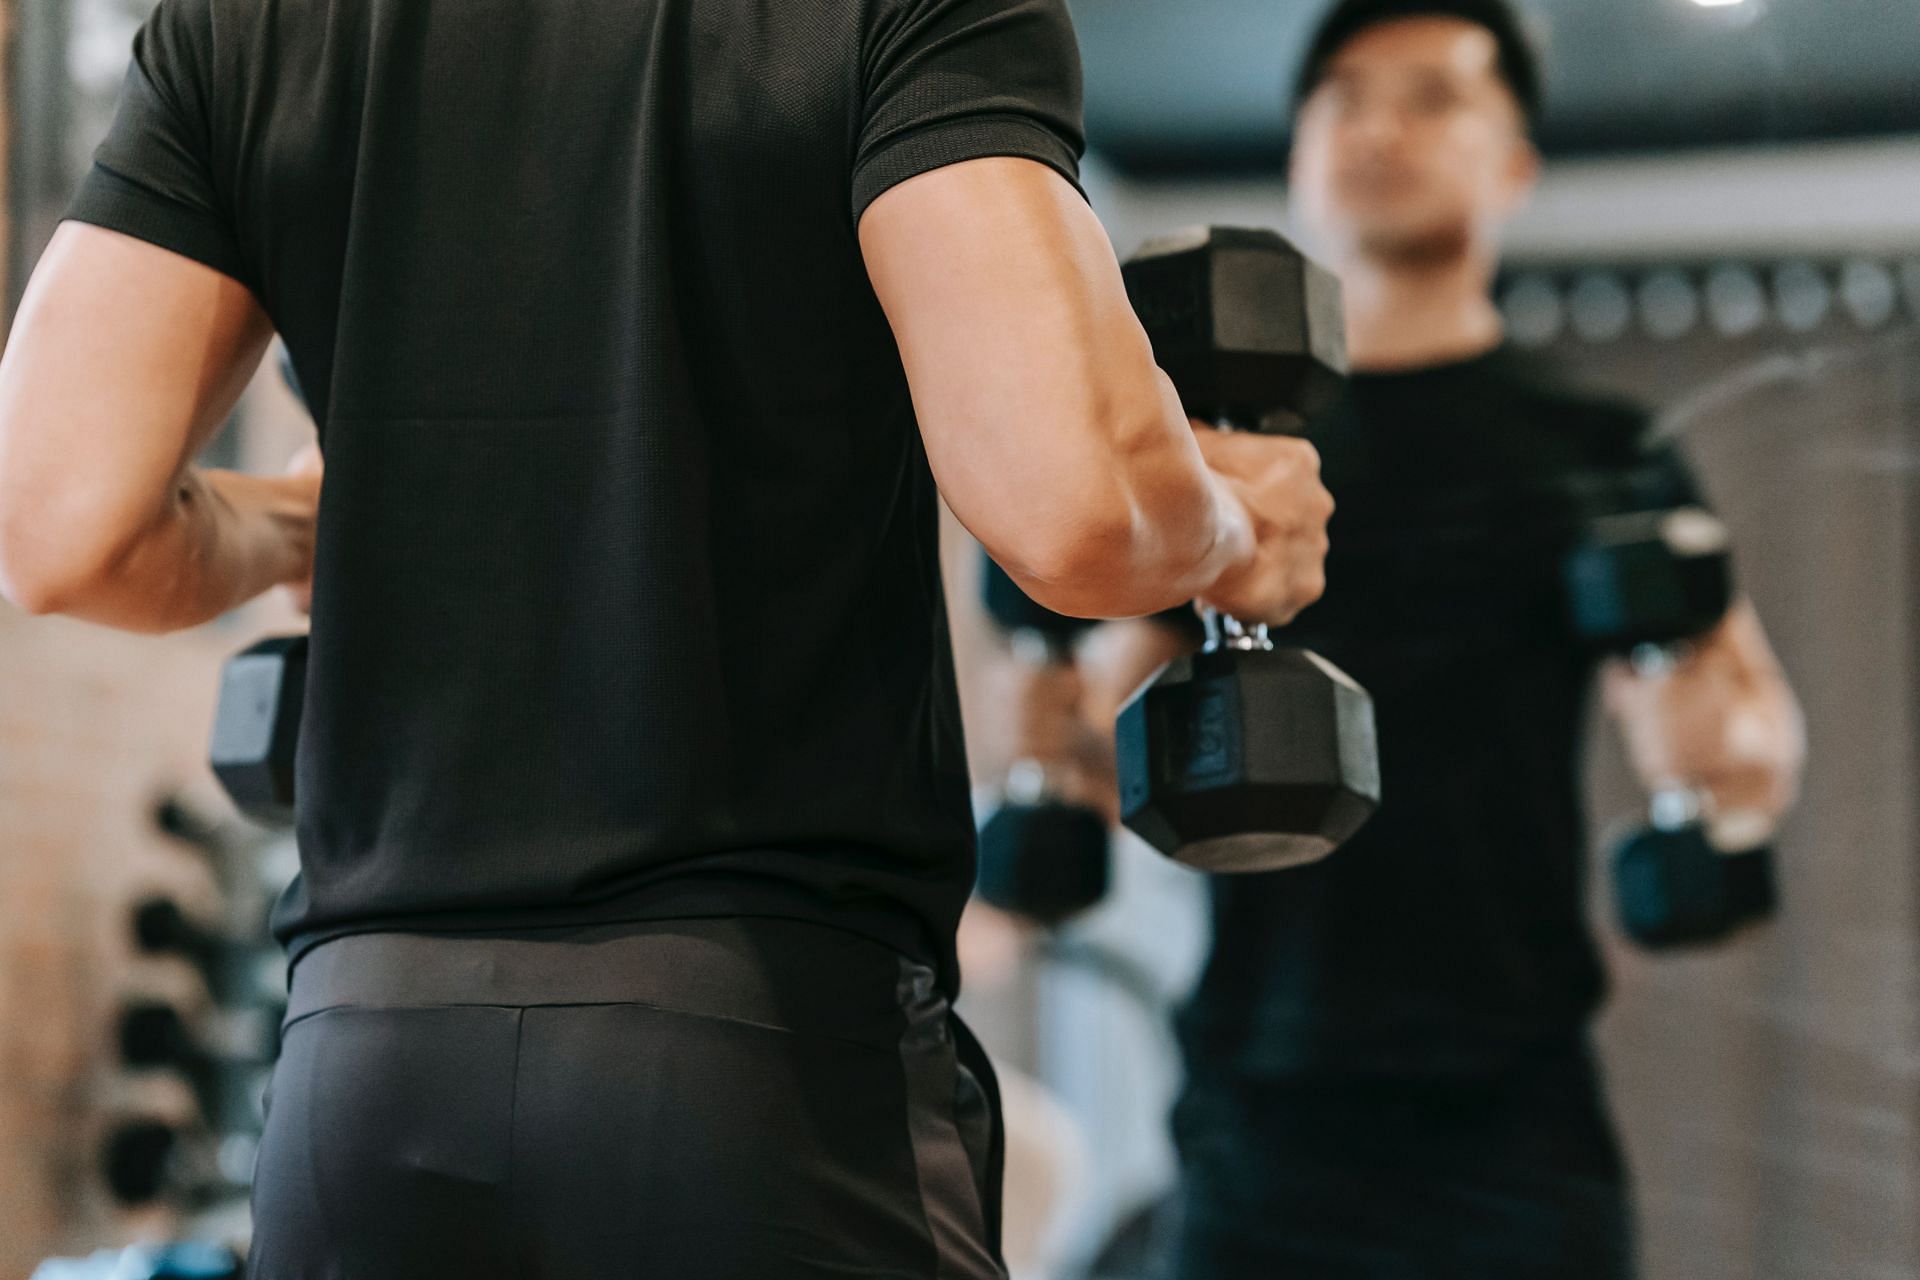 Dumbbell back exercises will help you strengthen your back muscles (Image via Pexels @Andres Ayrton)